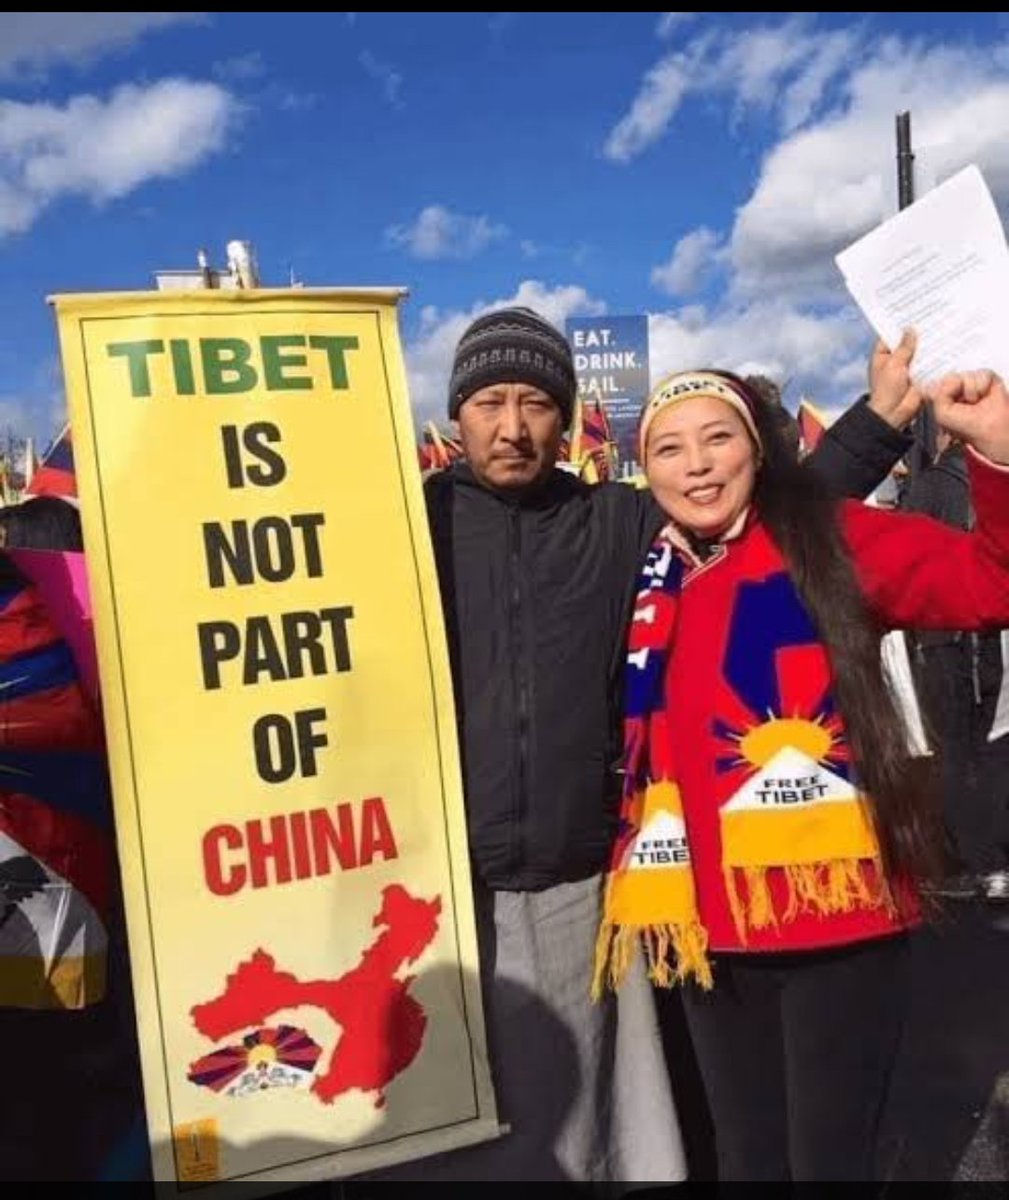 ALWAYS REMEMBER! Tibet was never part of China! In September 1949, Communist China, without any provocation, invaded eastern Tibet. FREE TIBET! STOP CHINA!  @info_tibet